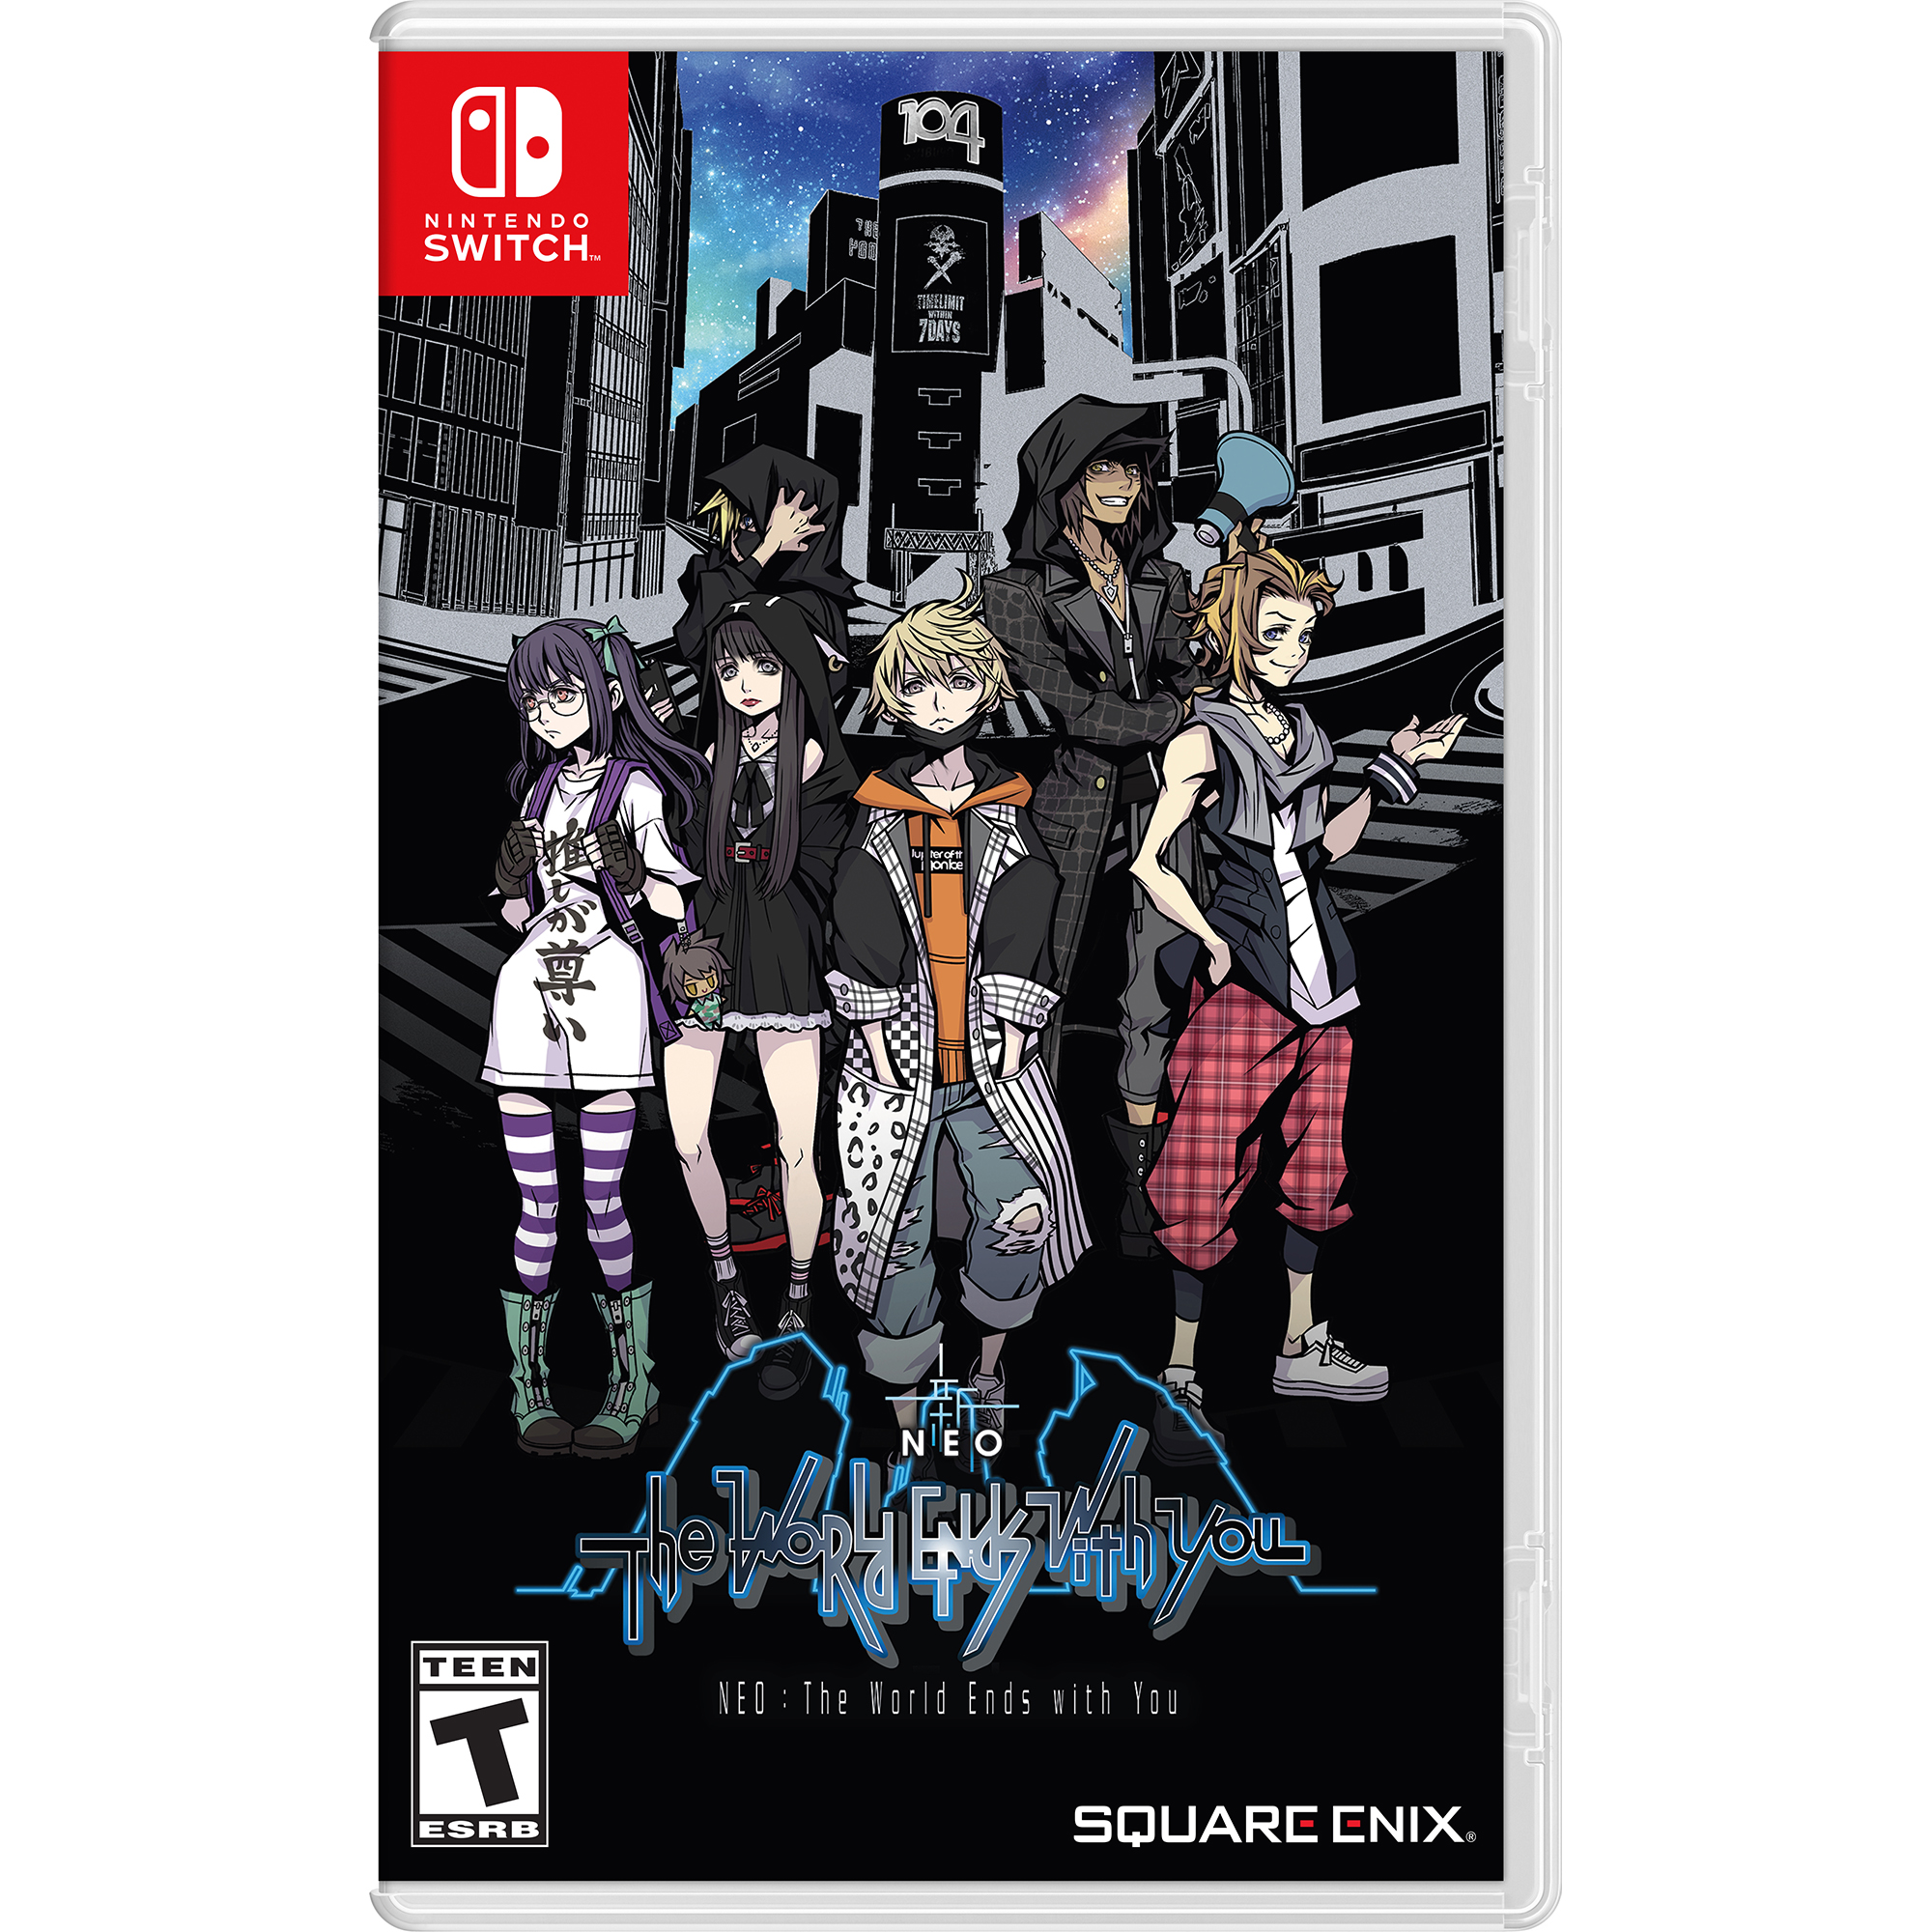 Neo: The World Ends With You, Square Enix, Nintendo Switch, [Physical], 662248925264 - Walmart.com $14.99